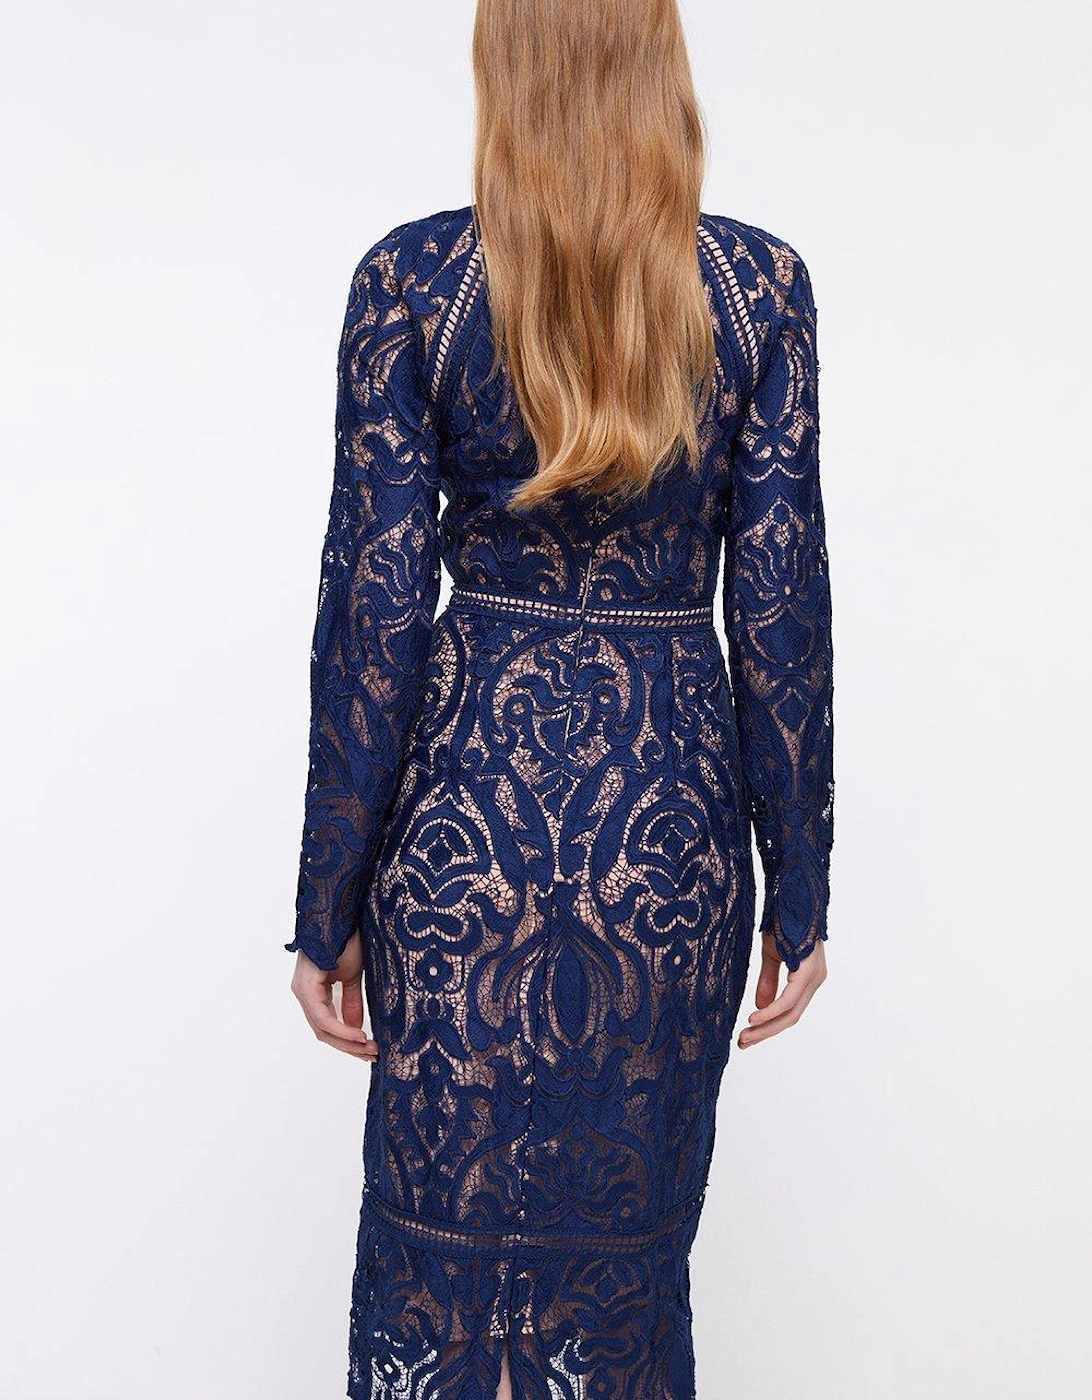 Contrast Lining Placement Lace Pencil Dress